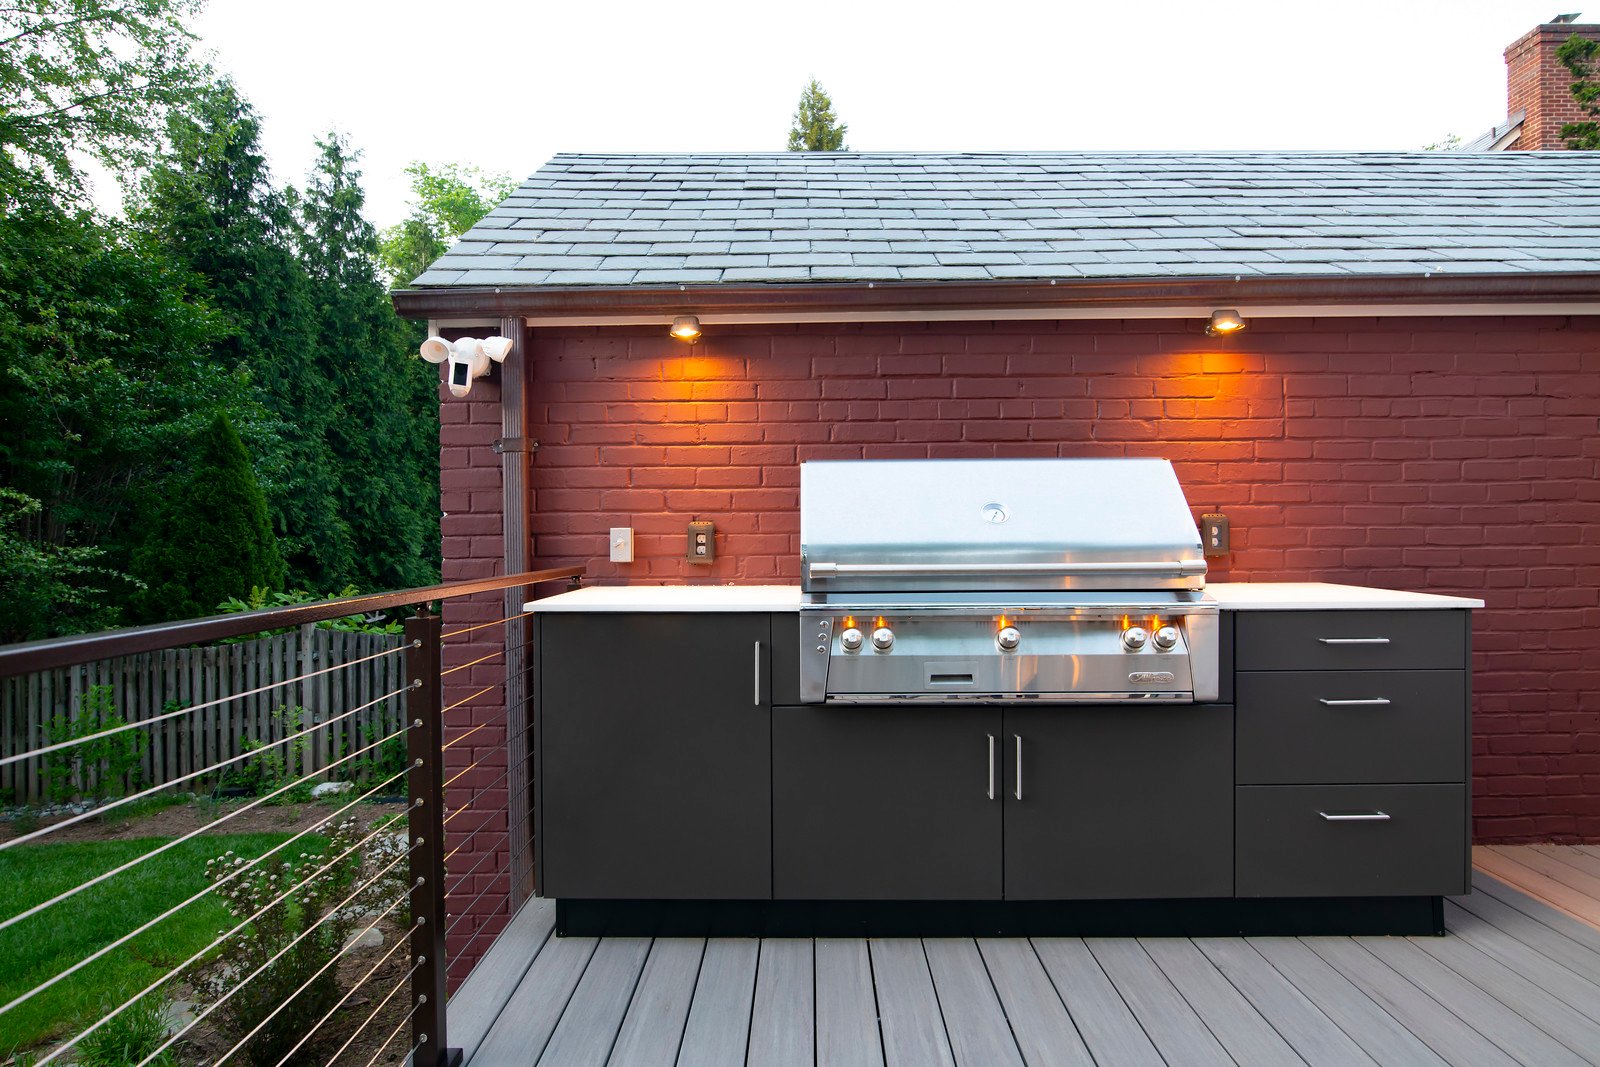 Chevy Chase Deck and Outdoor Kitchen